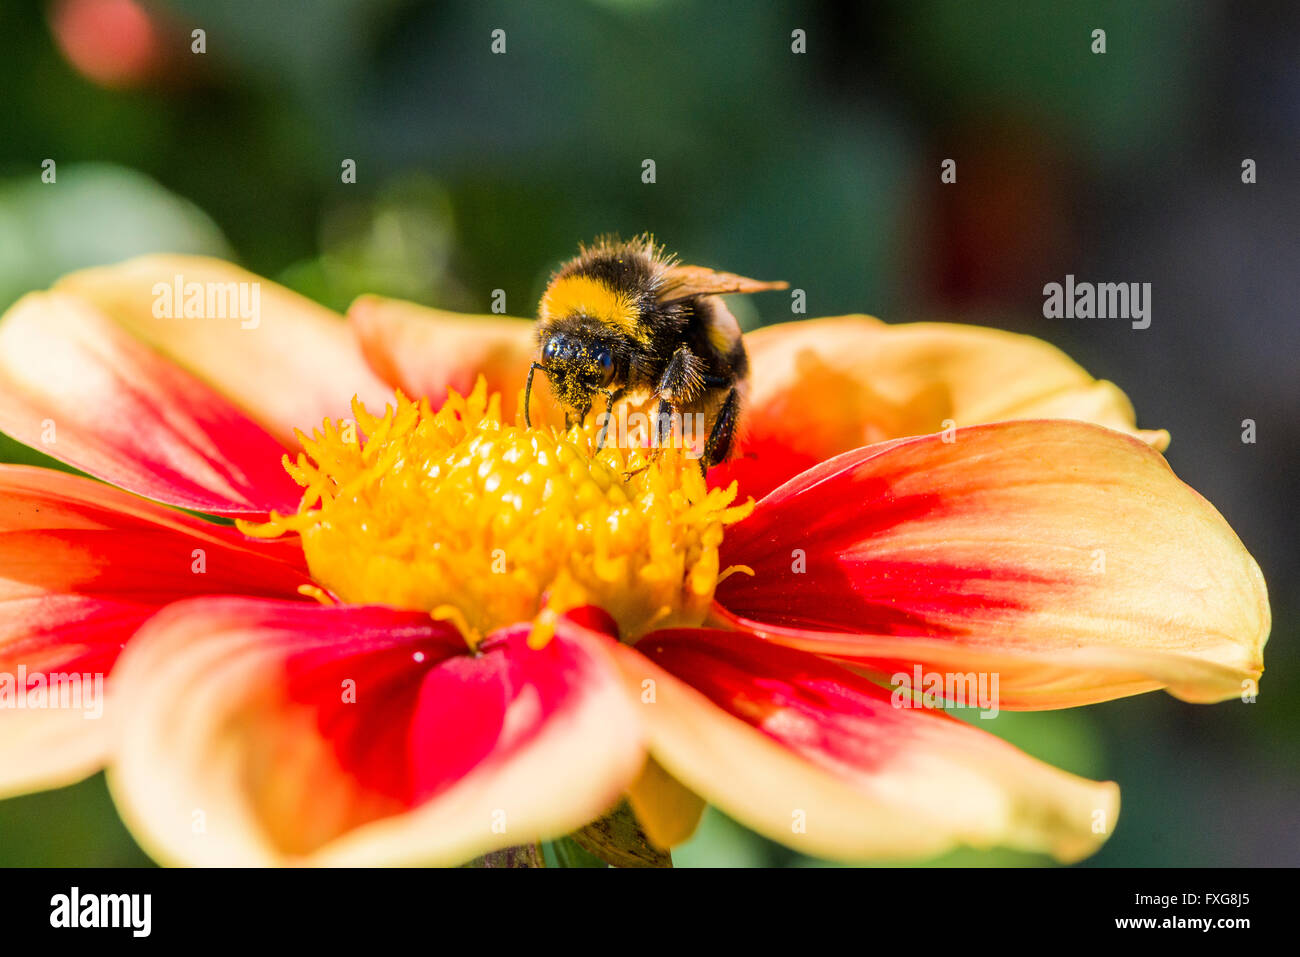 A Buff-tailed Bumblebee (Bombus terrestris) is collecting nectar from a Dahlia (Asteraceae) blossom, Saxony, Germany Stock Photo